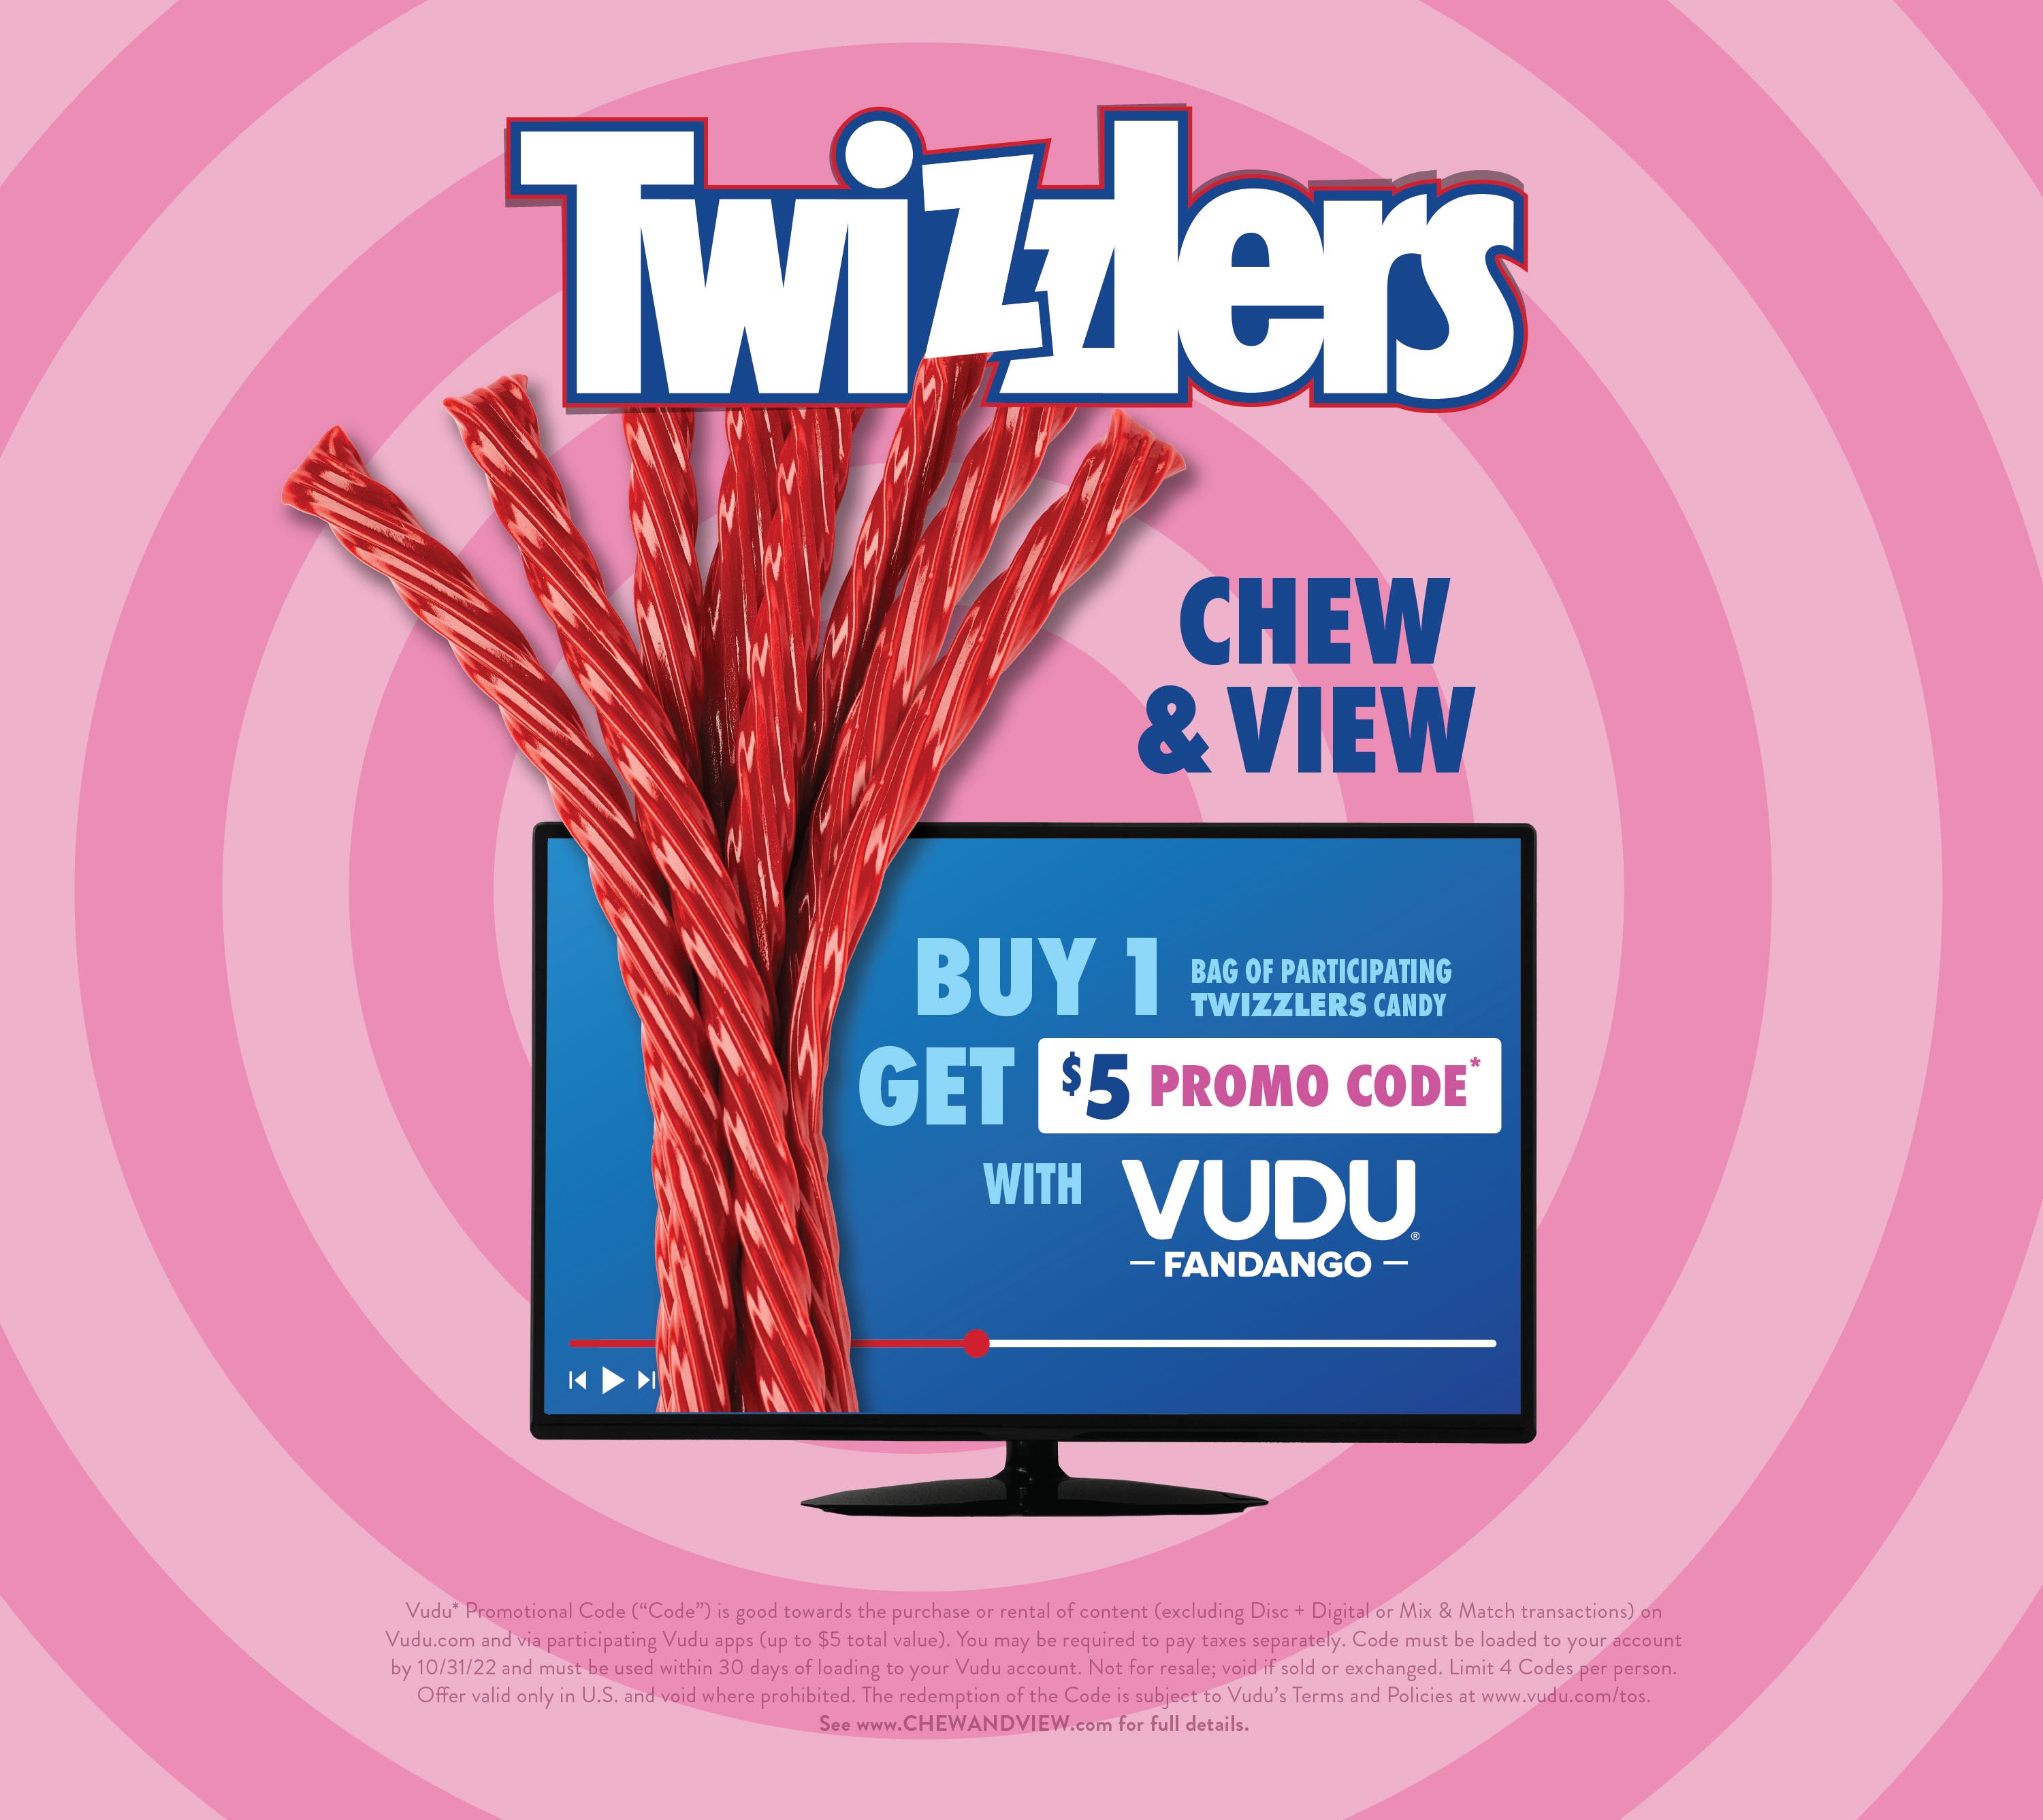 Twizzlers Chew and view promo